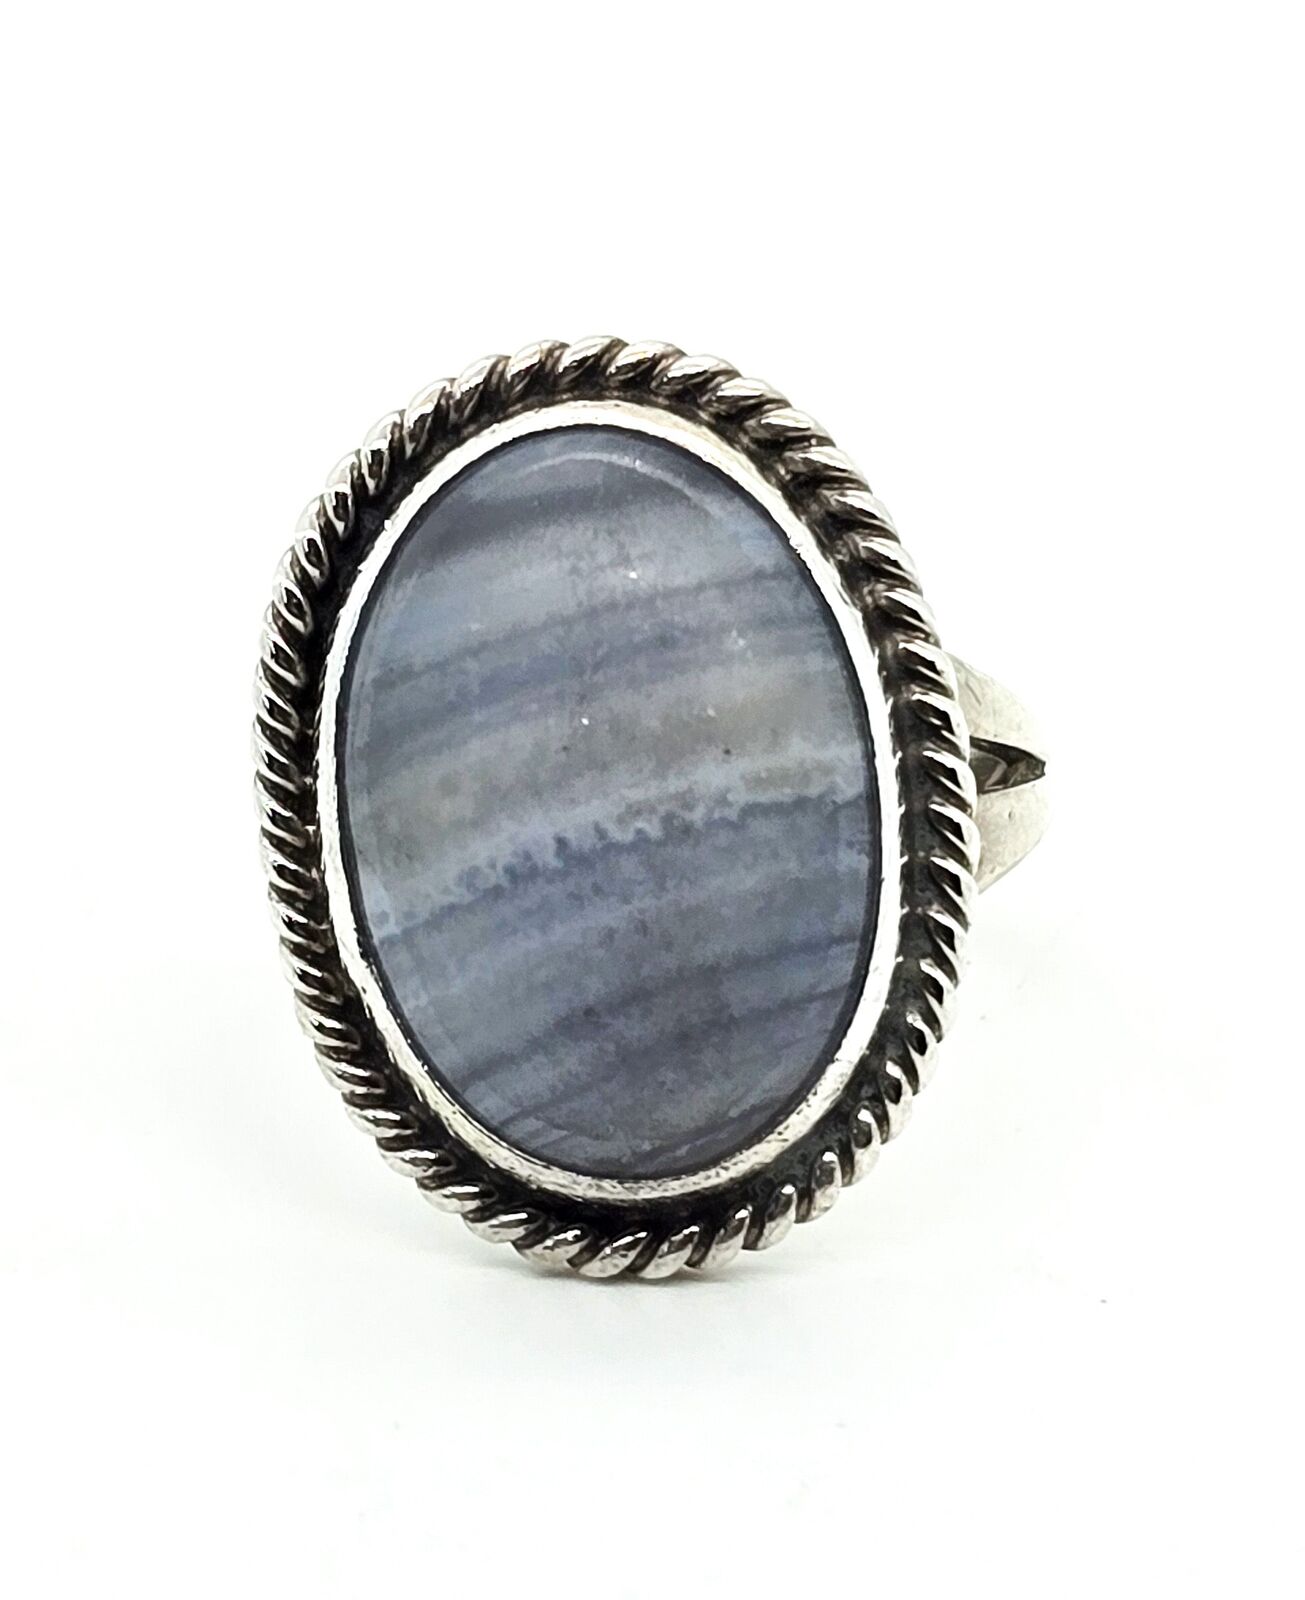 Gilo & Grace Nakai Navajo Blue lace agate vintage sterling silver ring size 6